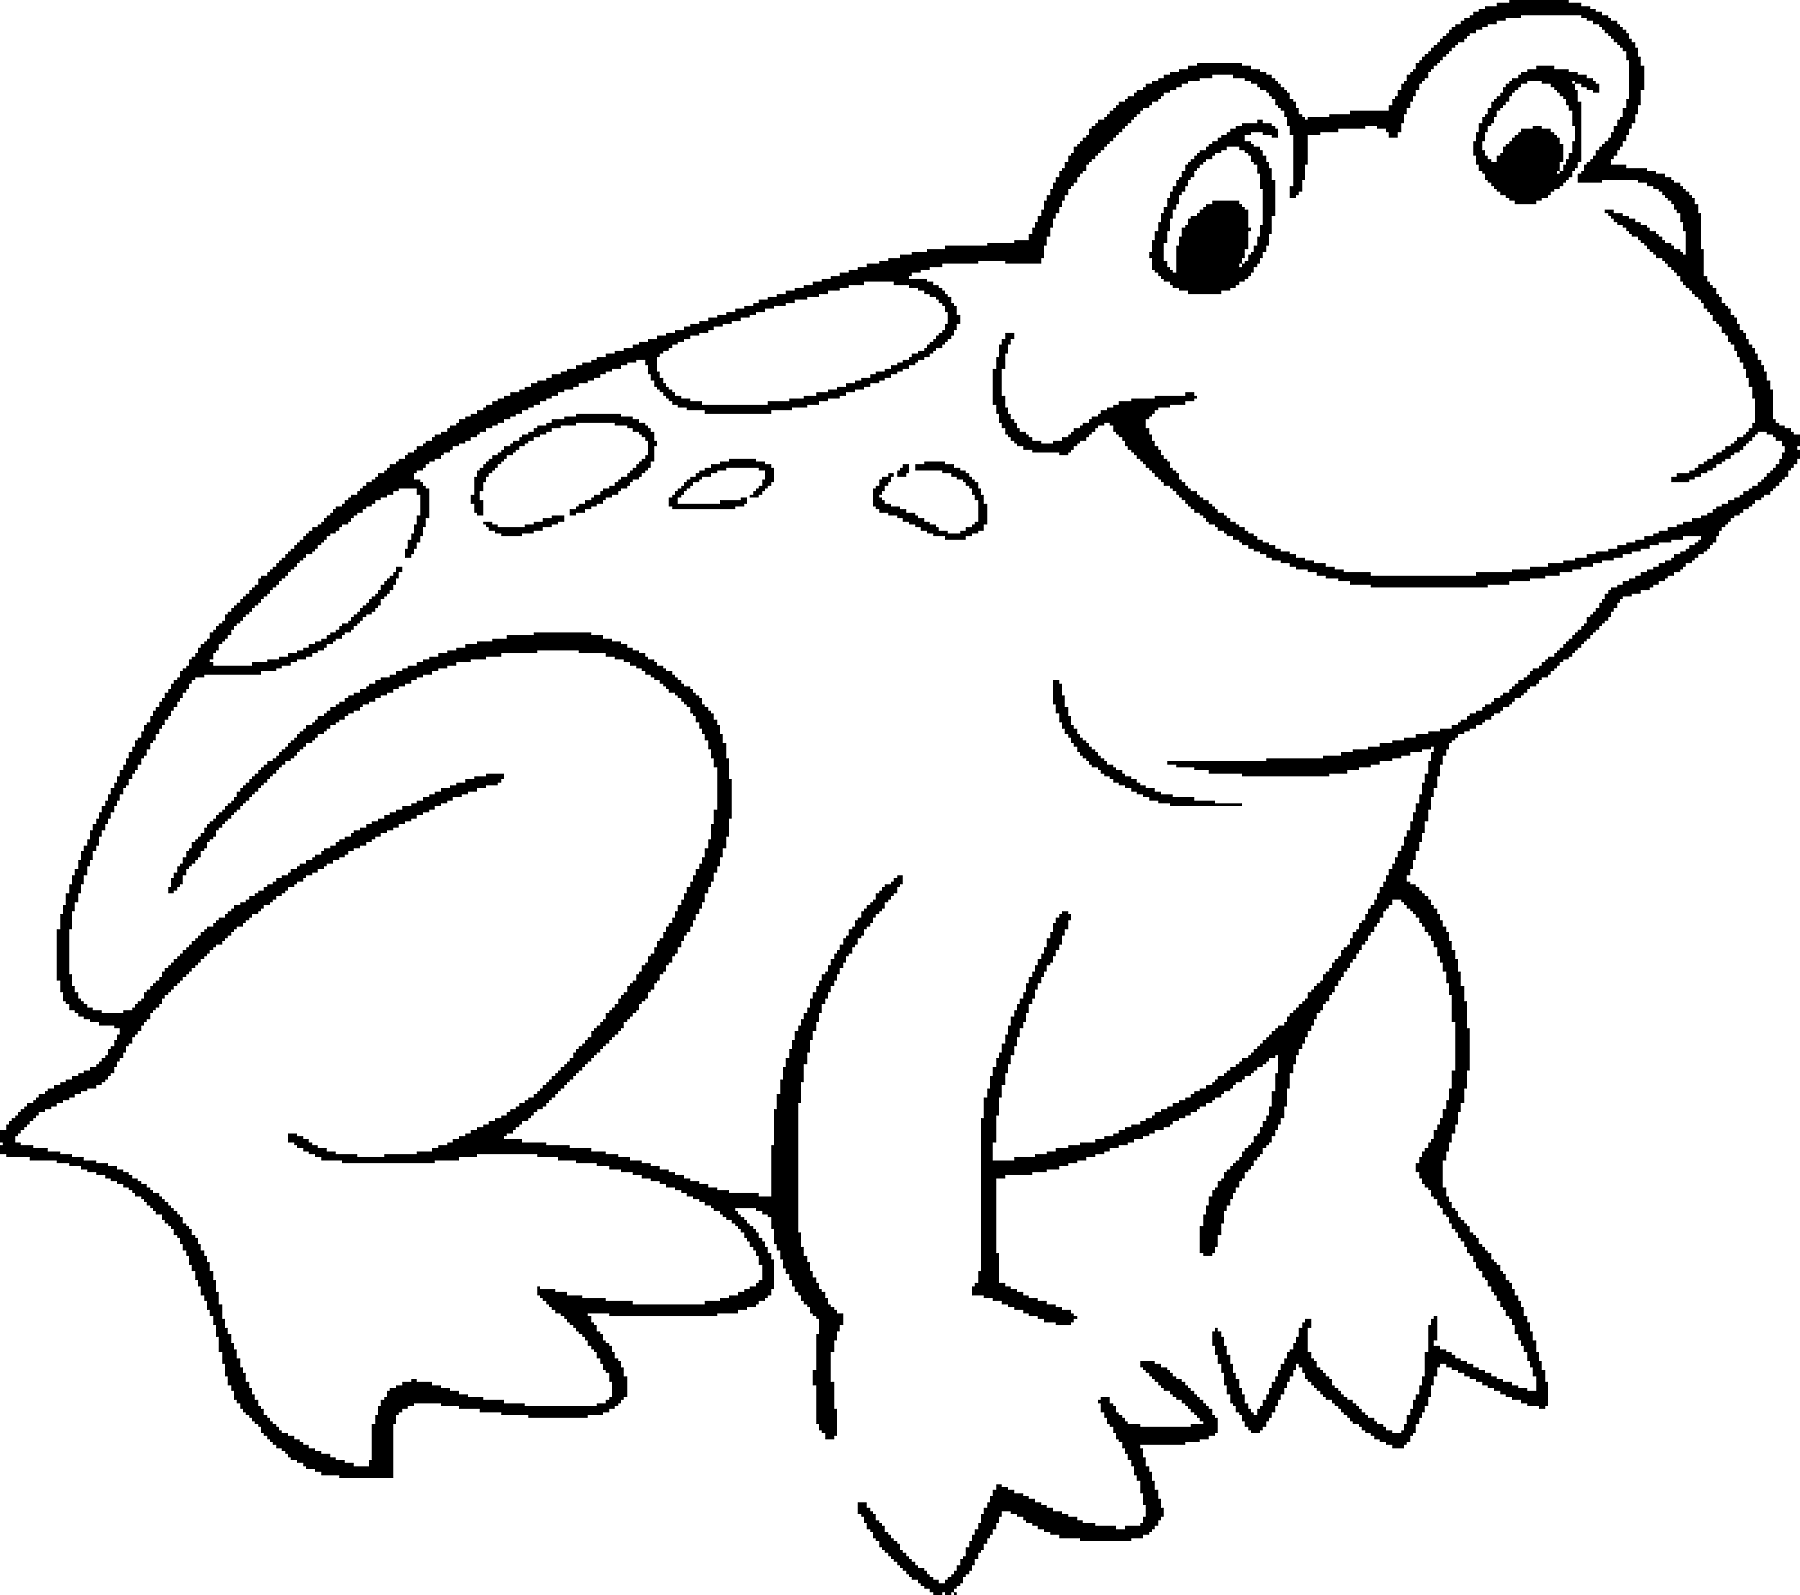 Black and White Cartoon Frog 